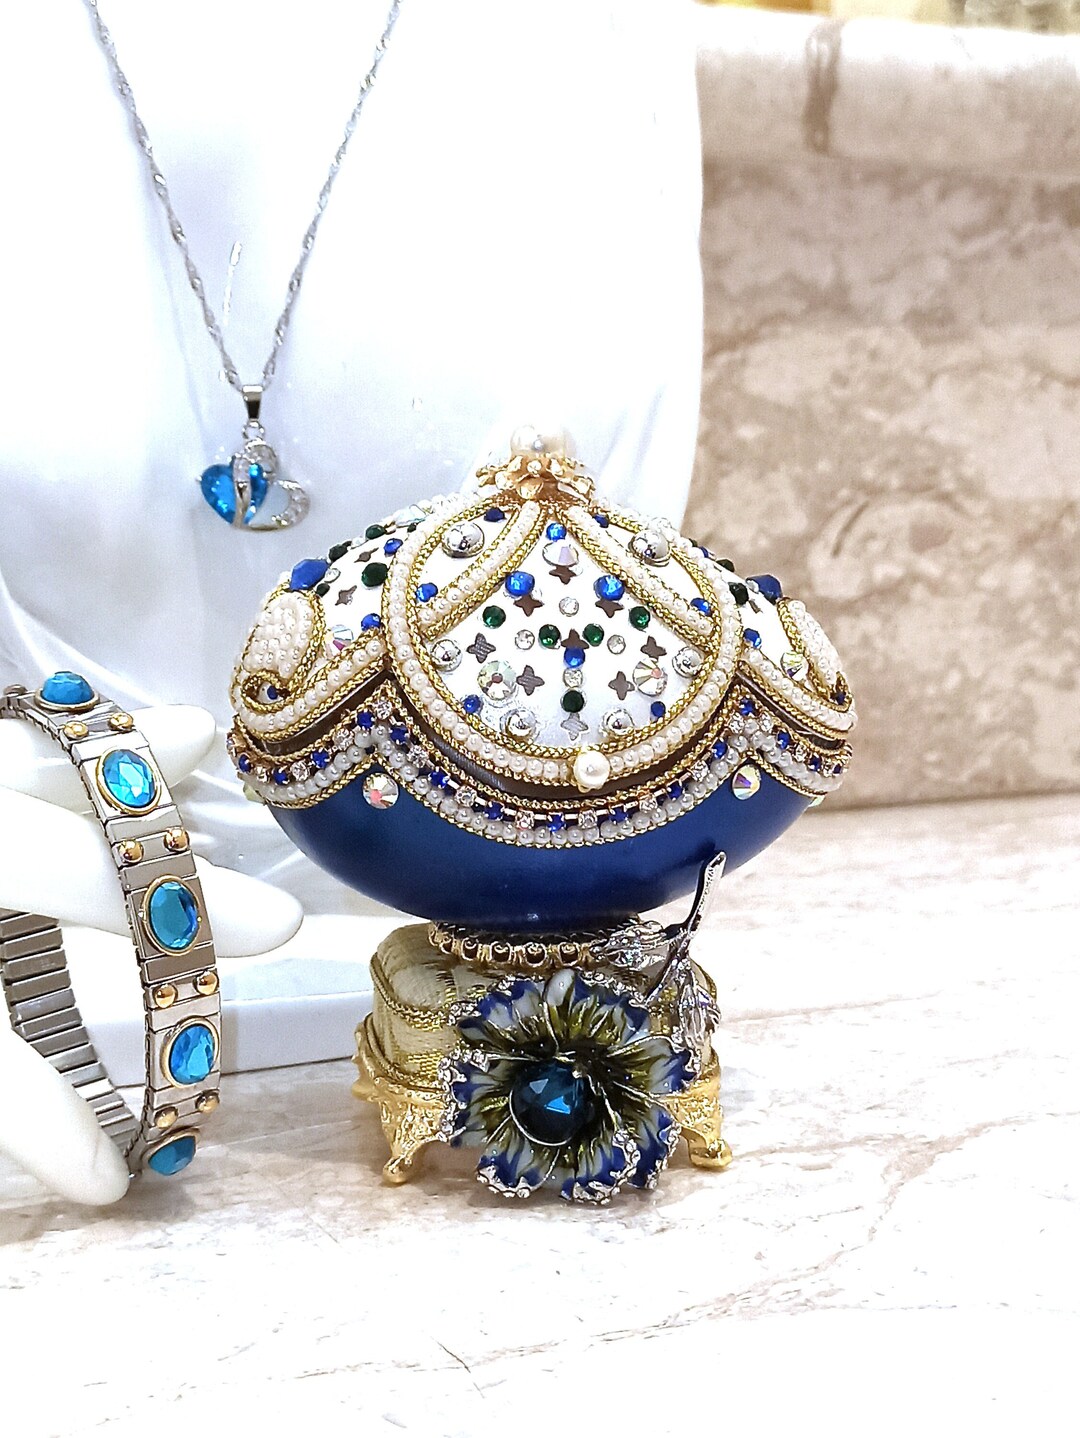 One Of a Kind Faberge Egg 24kGOLD Faberge Egg Music Box Etsy 日本